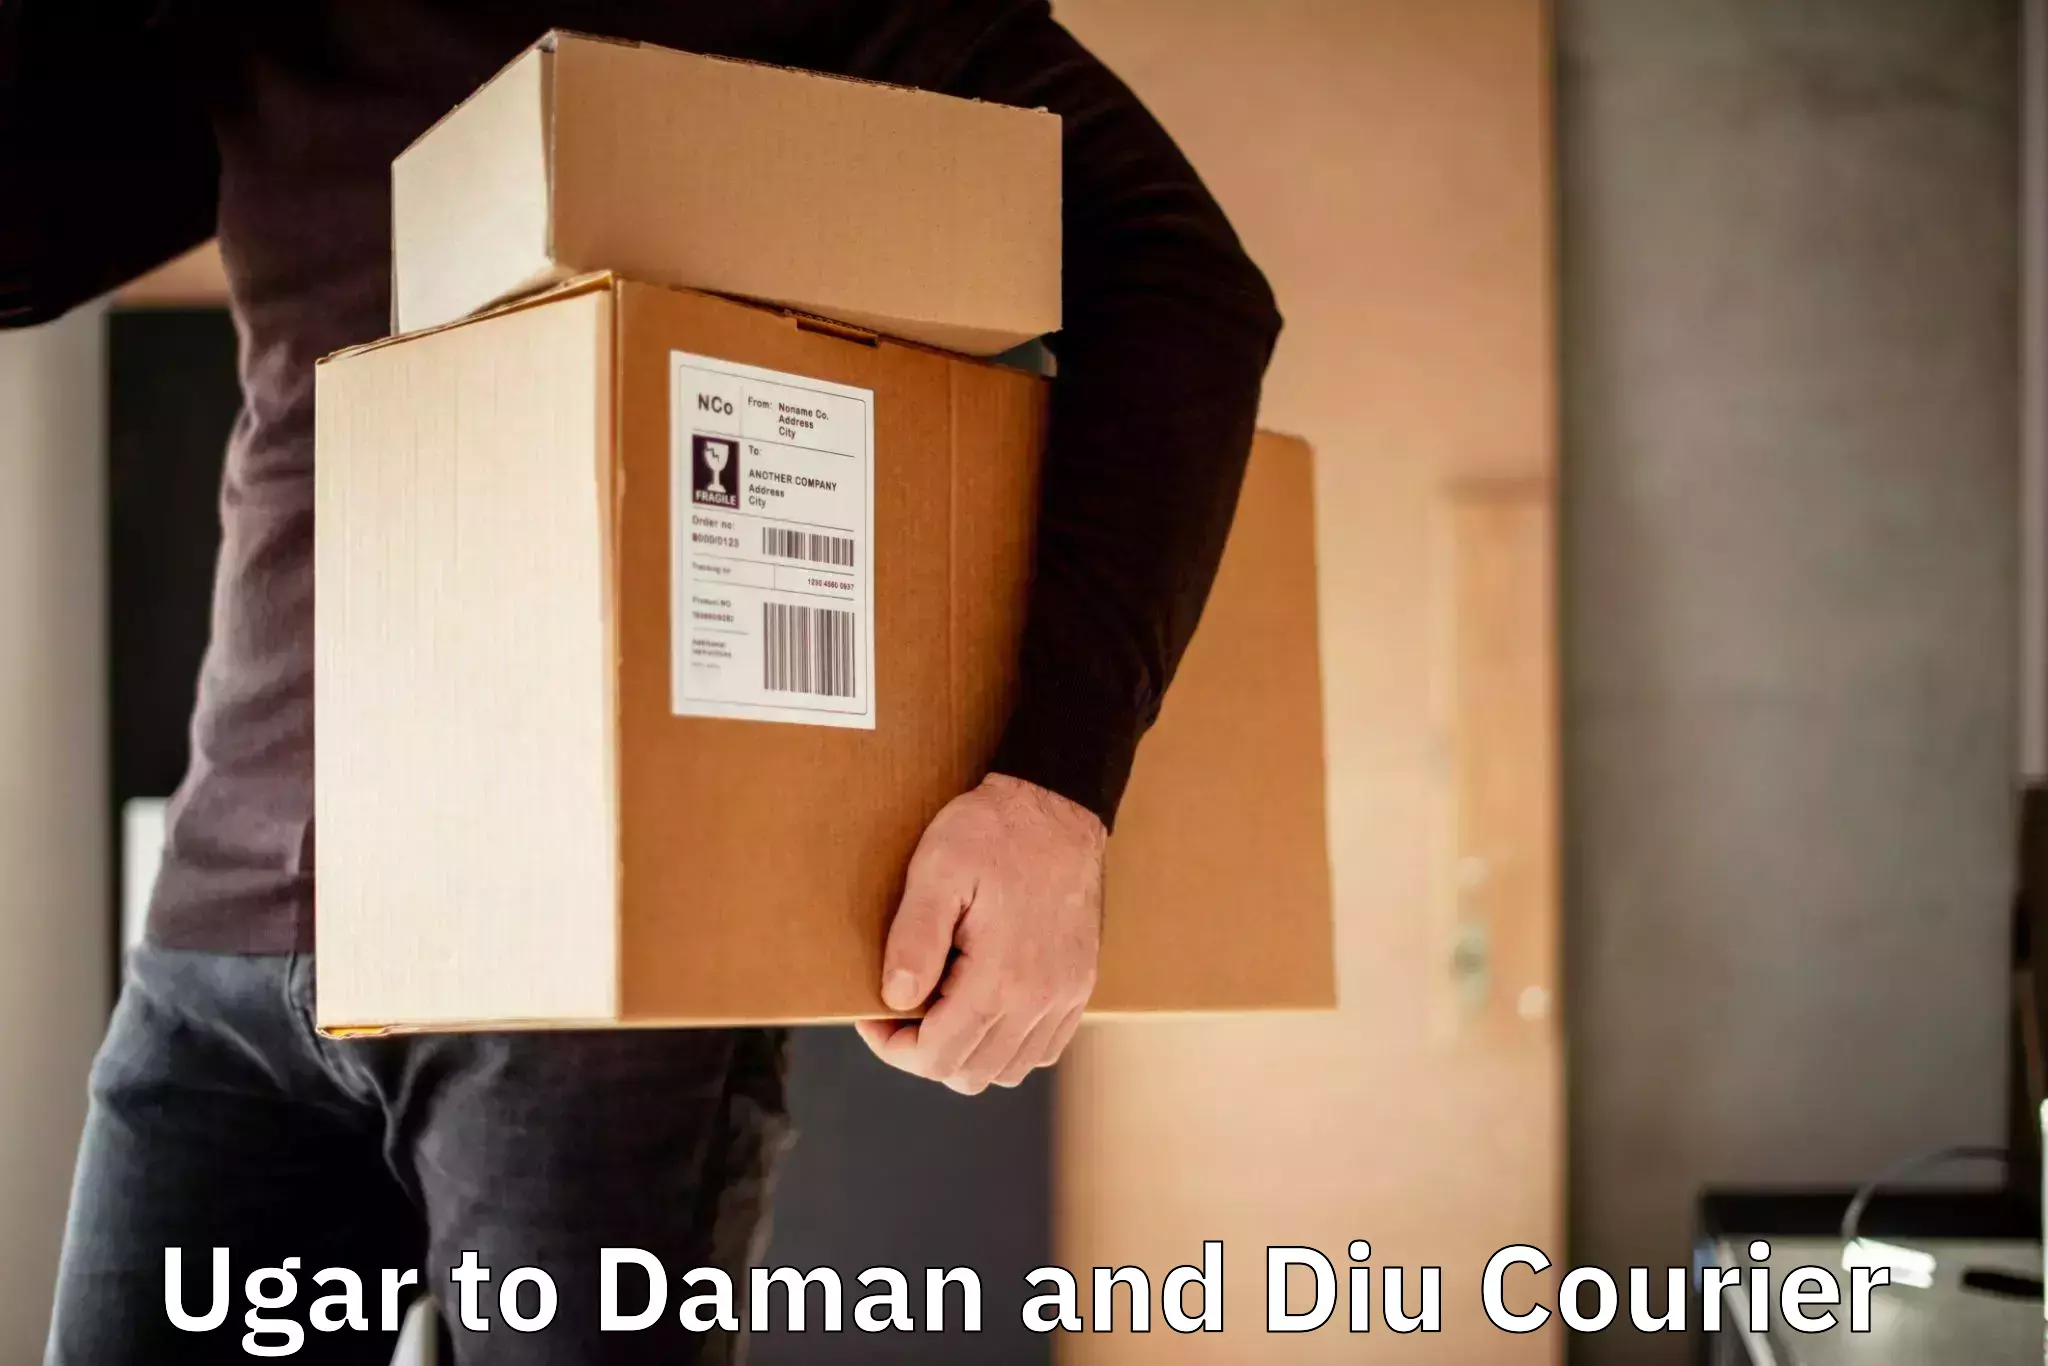 Corporate courier solutions Ugar to Diu